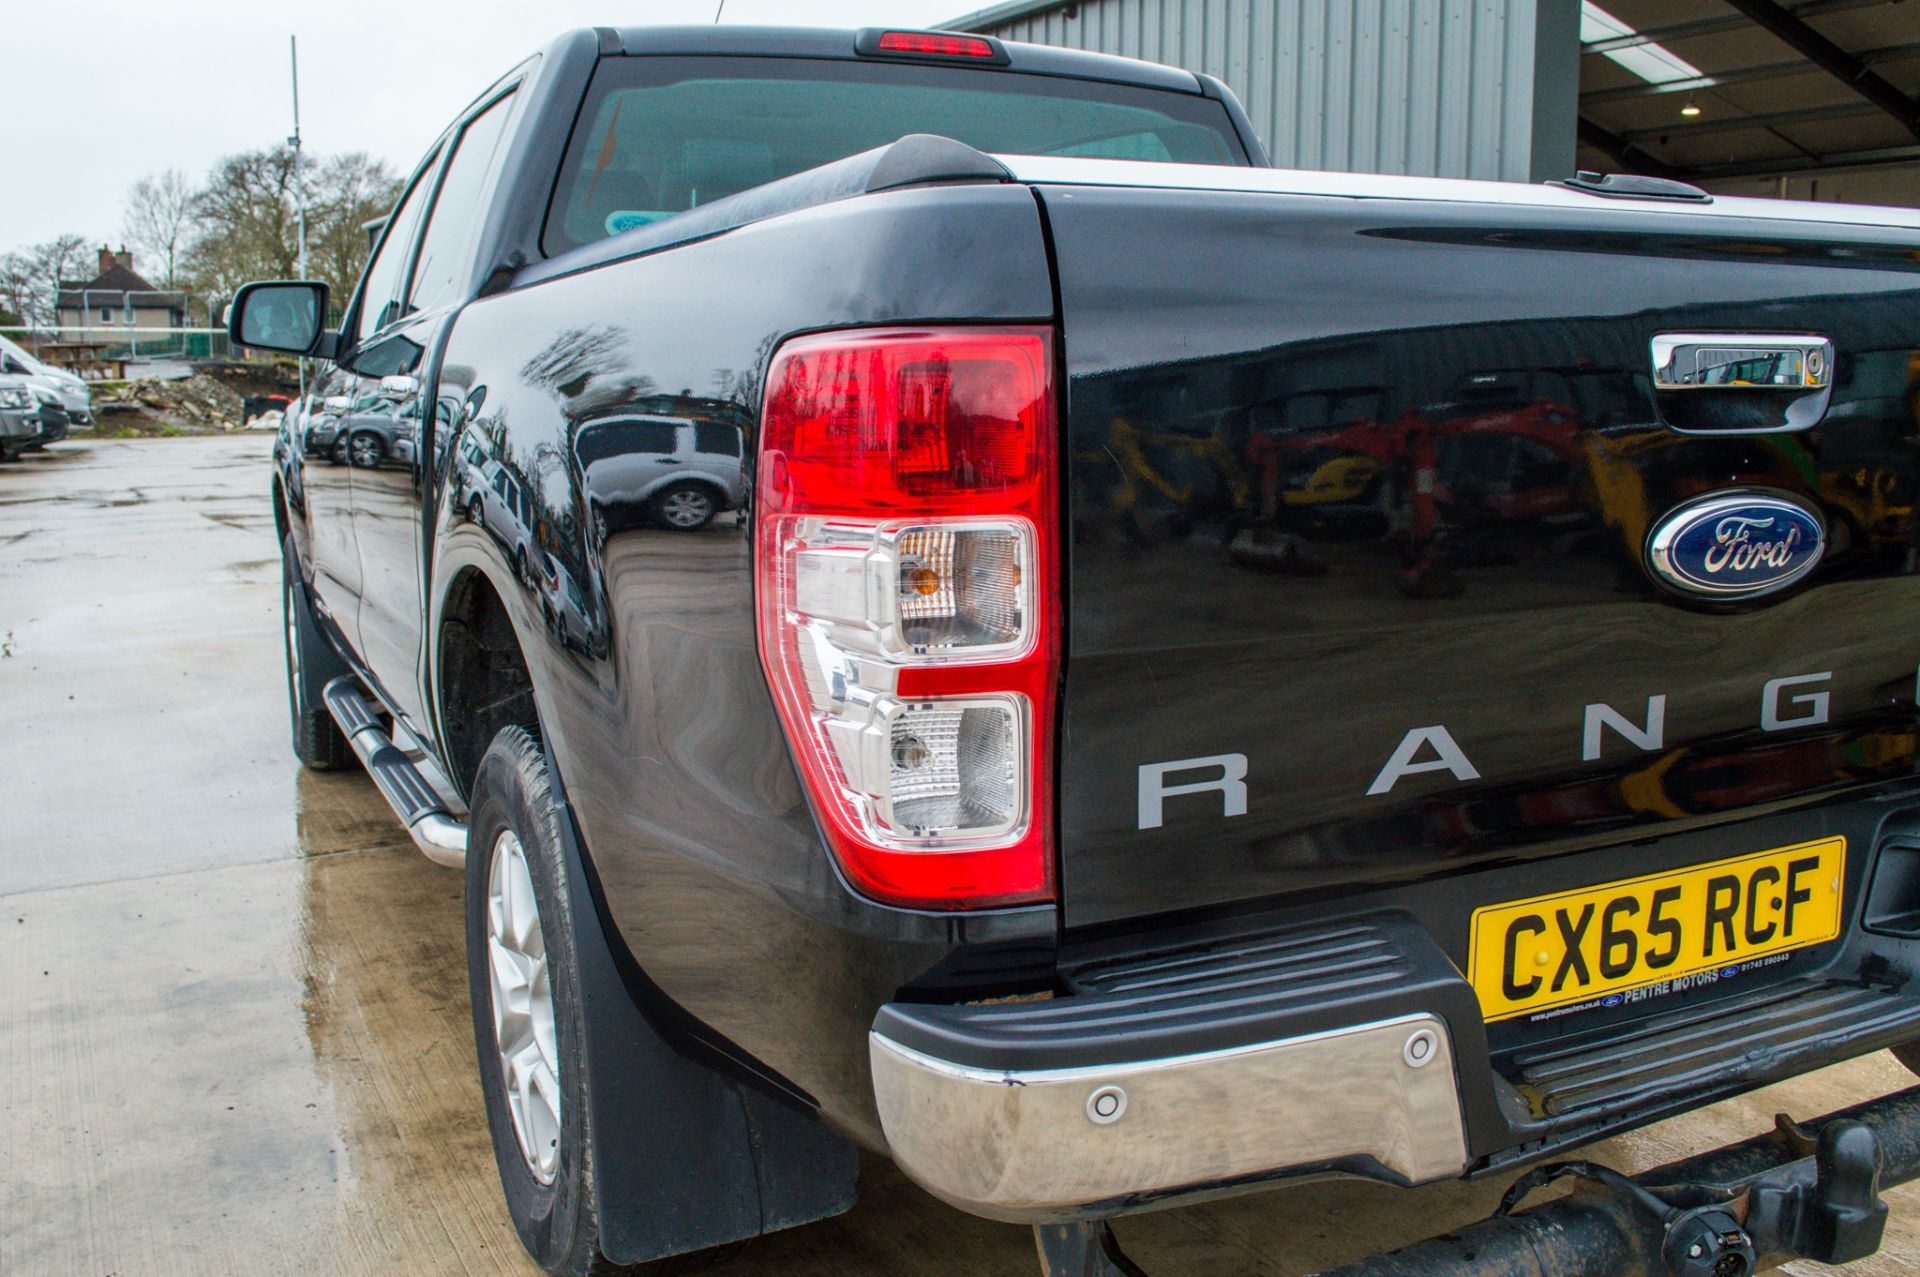 Ford Ranger 2.2 TDCI 150 Limited 4wd automatic double cab pick up - Image 11 of 28